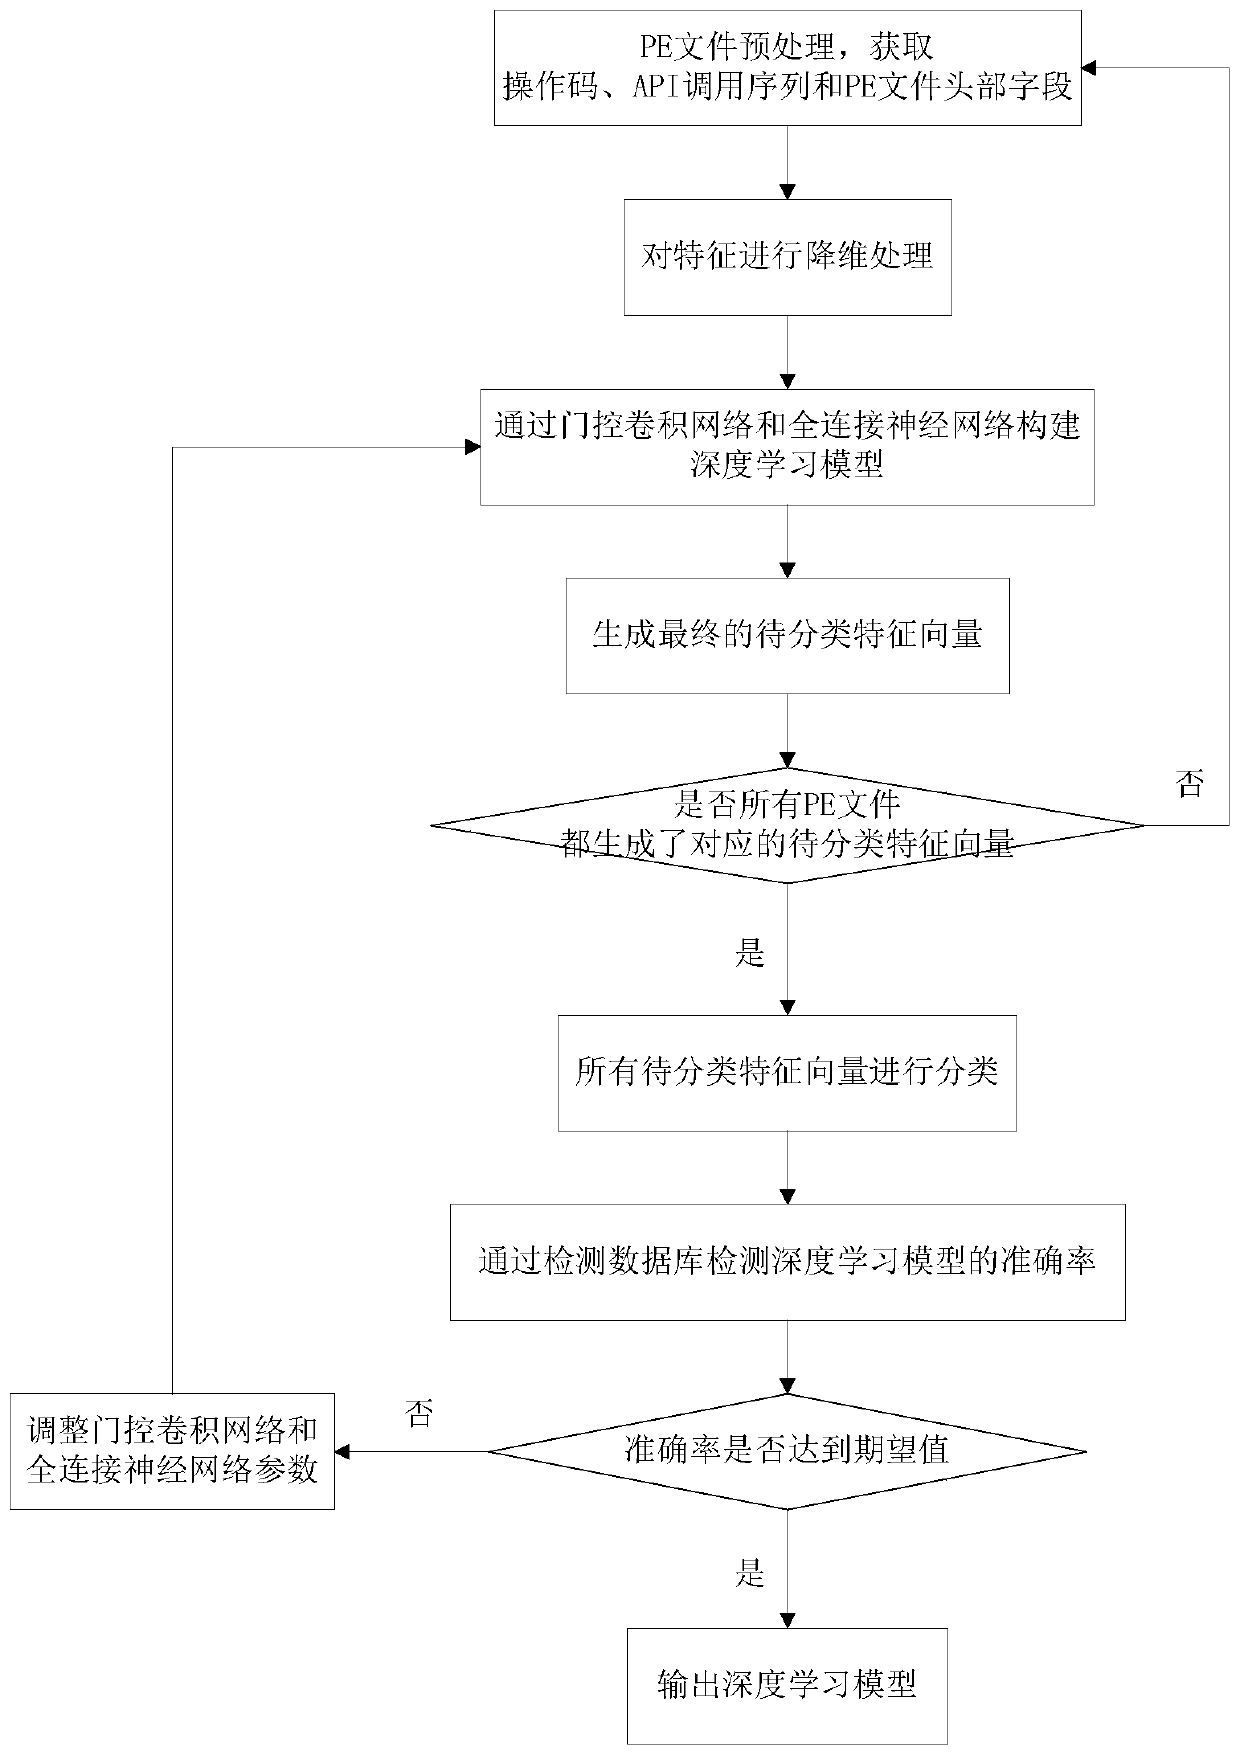 Malicious code detection method and system